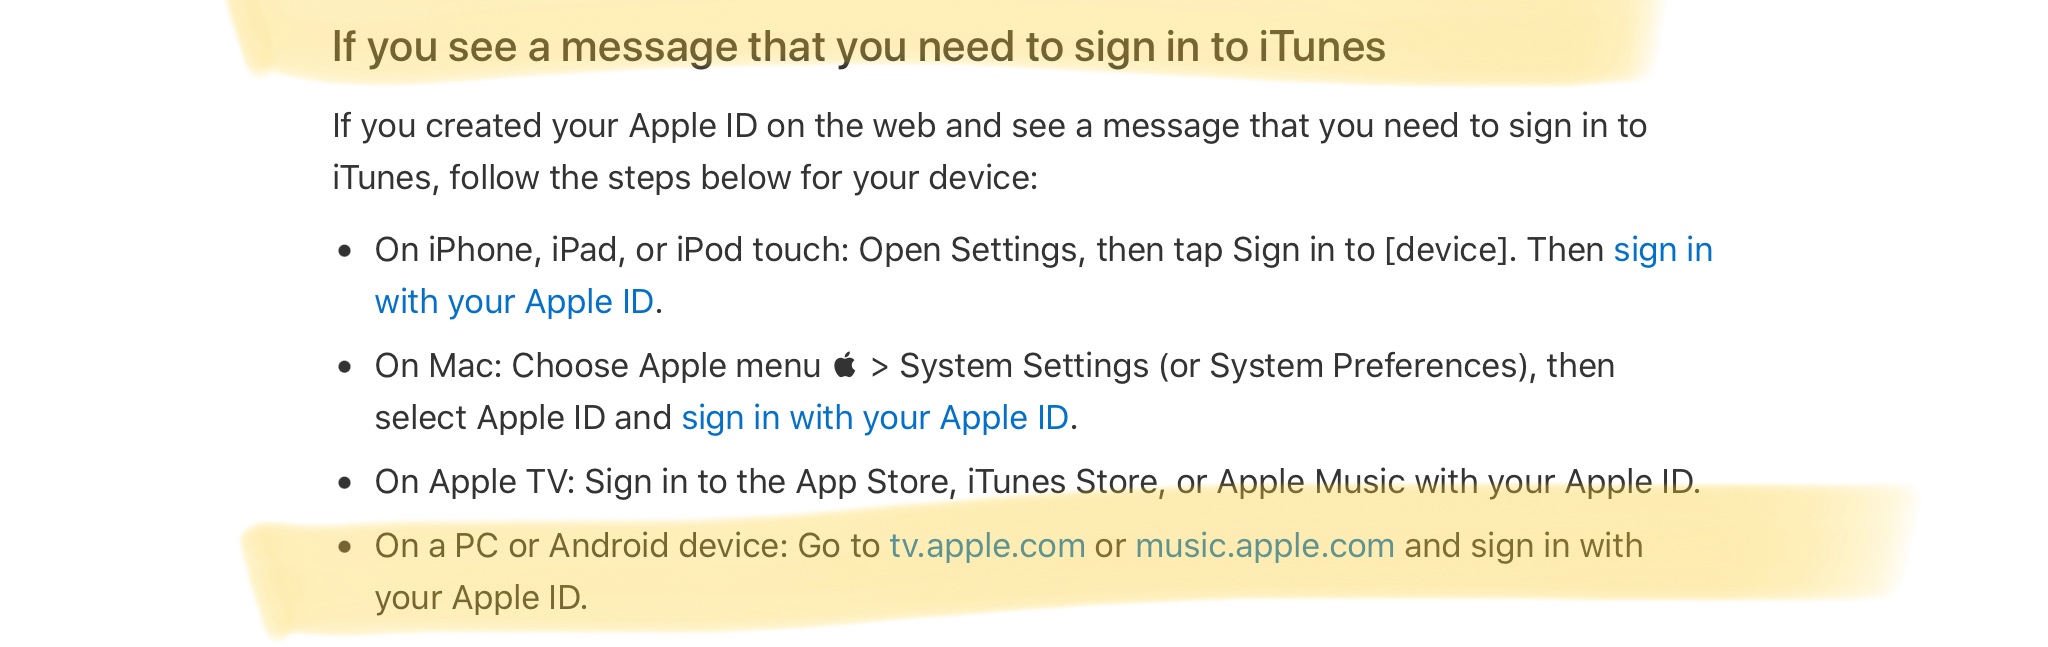 How to create a new Apple ID - Apple Support